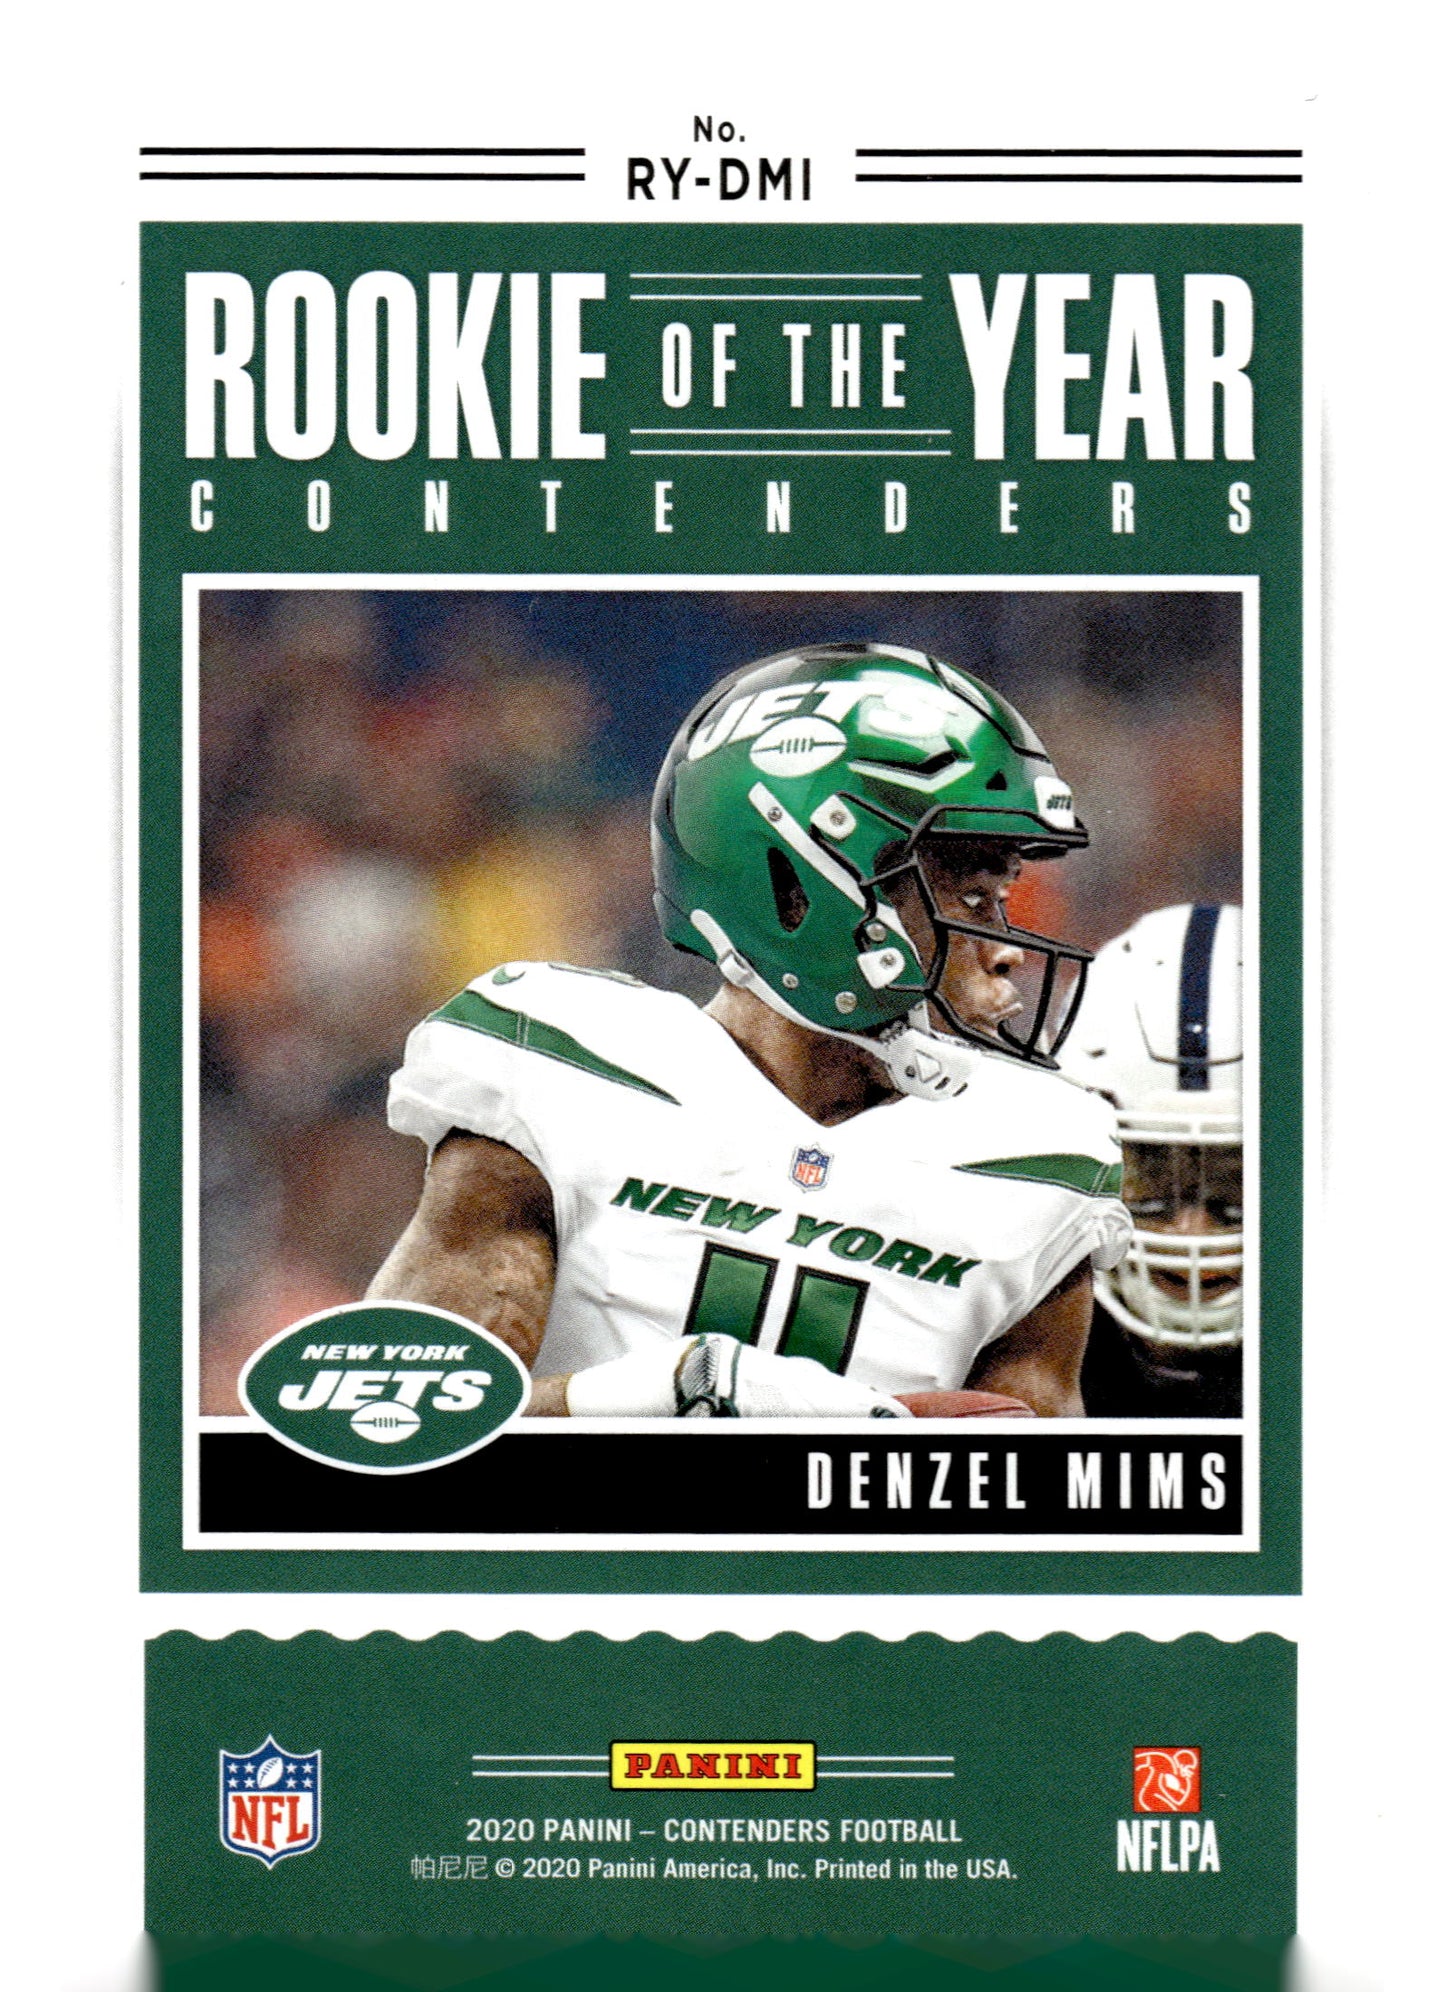 2020 Panini Contenders #RY-DMI Denzel Mims Rookie of the Year Contenders Emerald